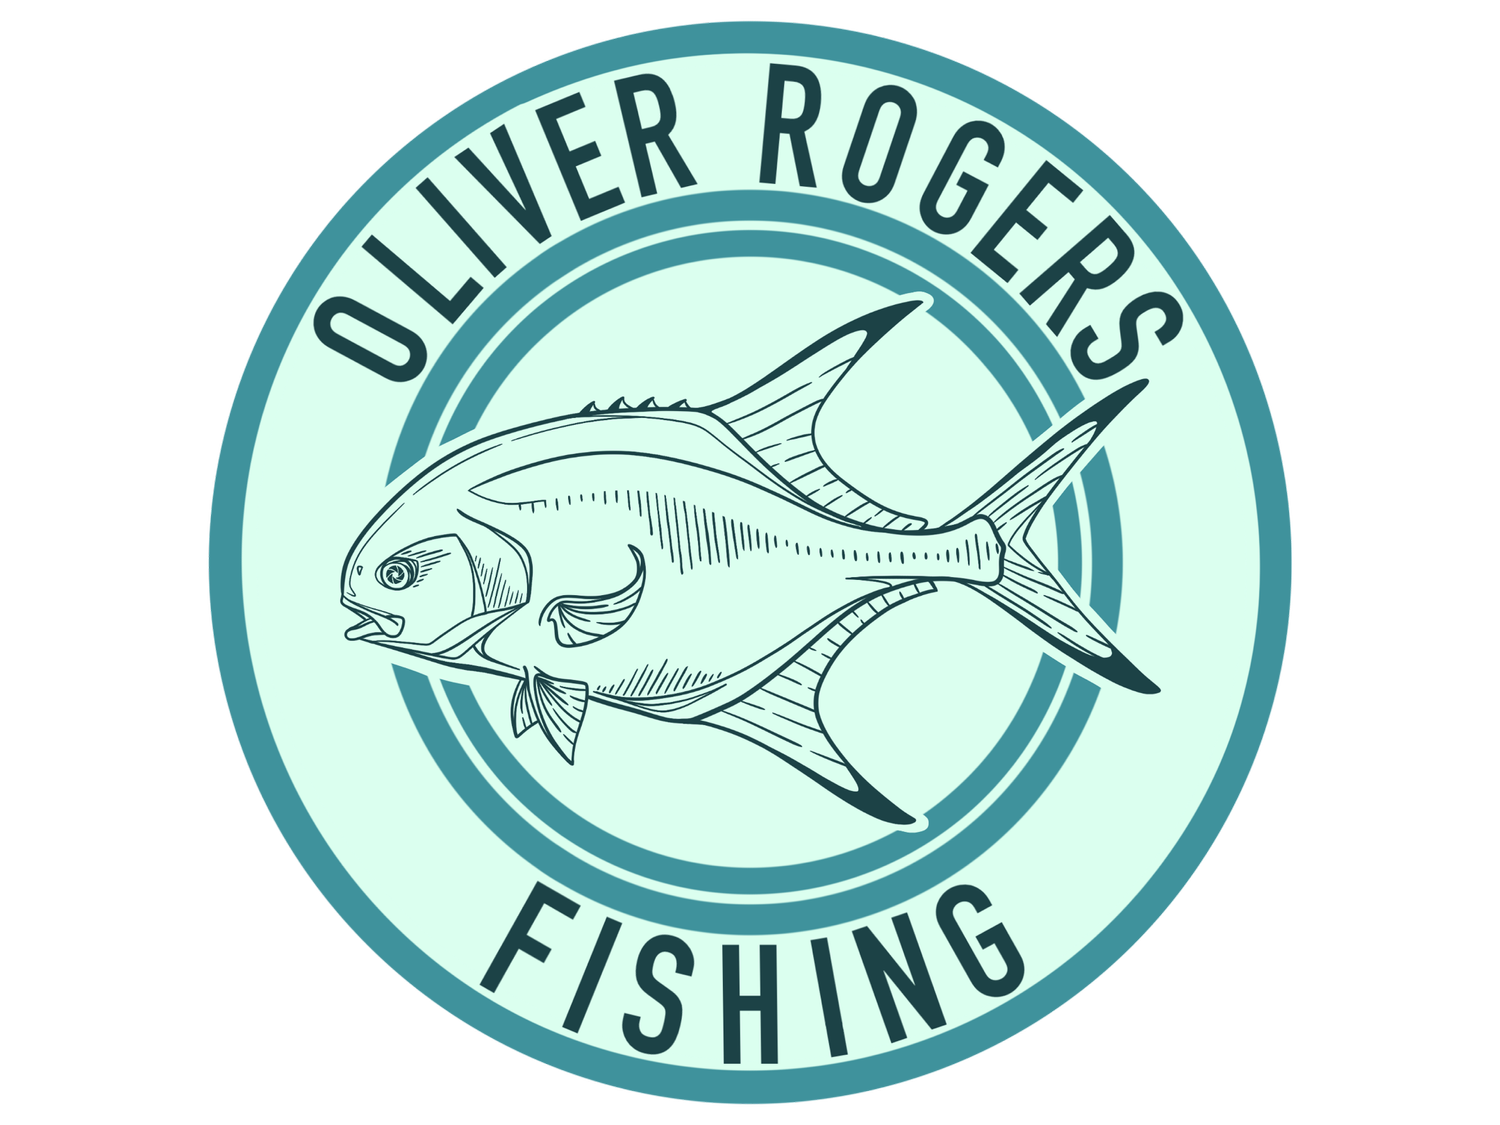 Everglades Fly Fishing Guide: Capt. Oliver Rogers